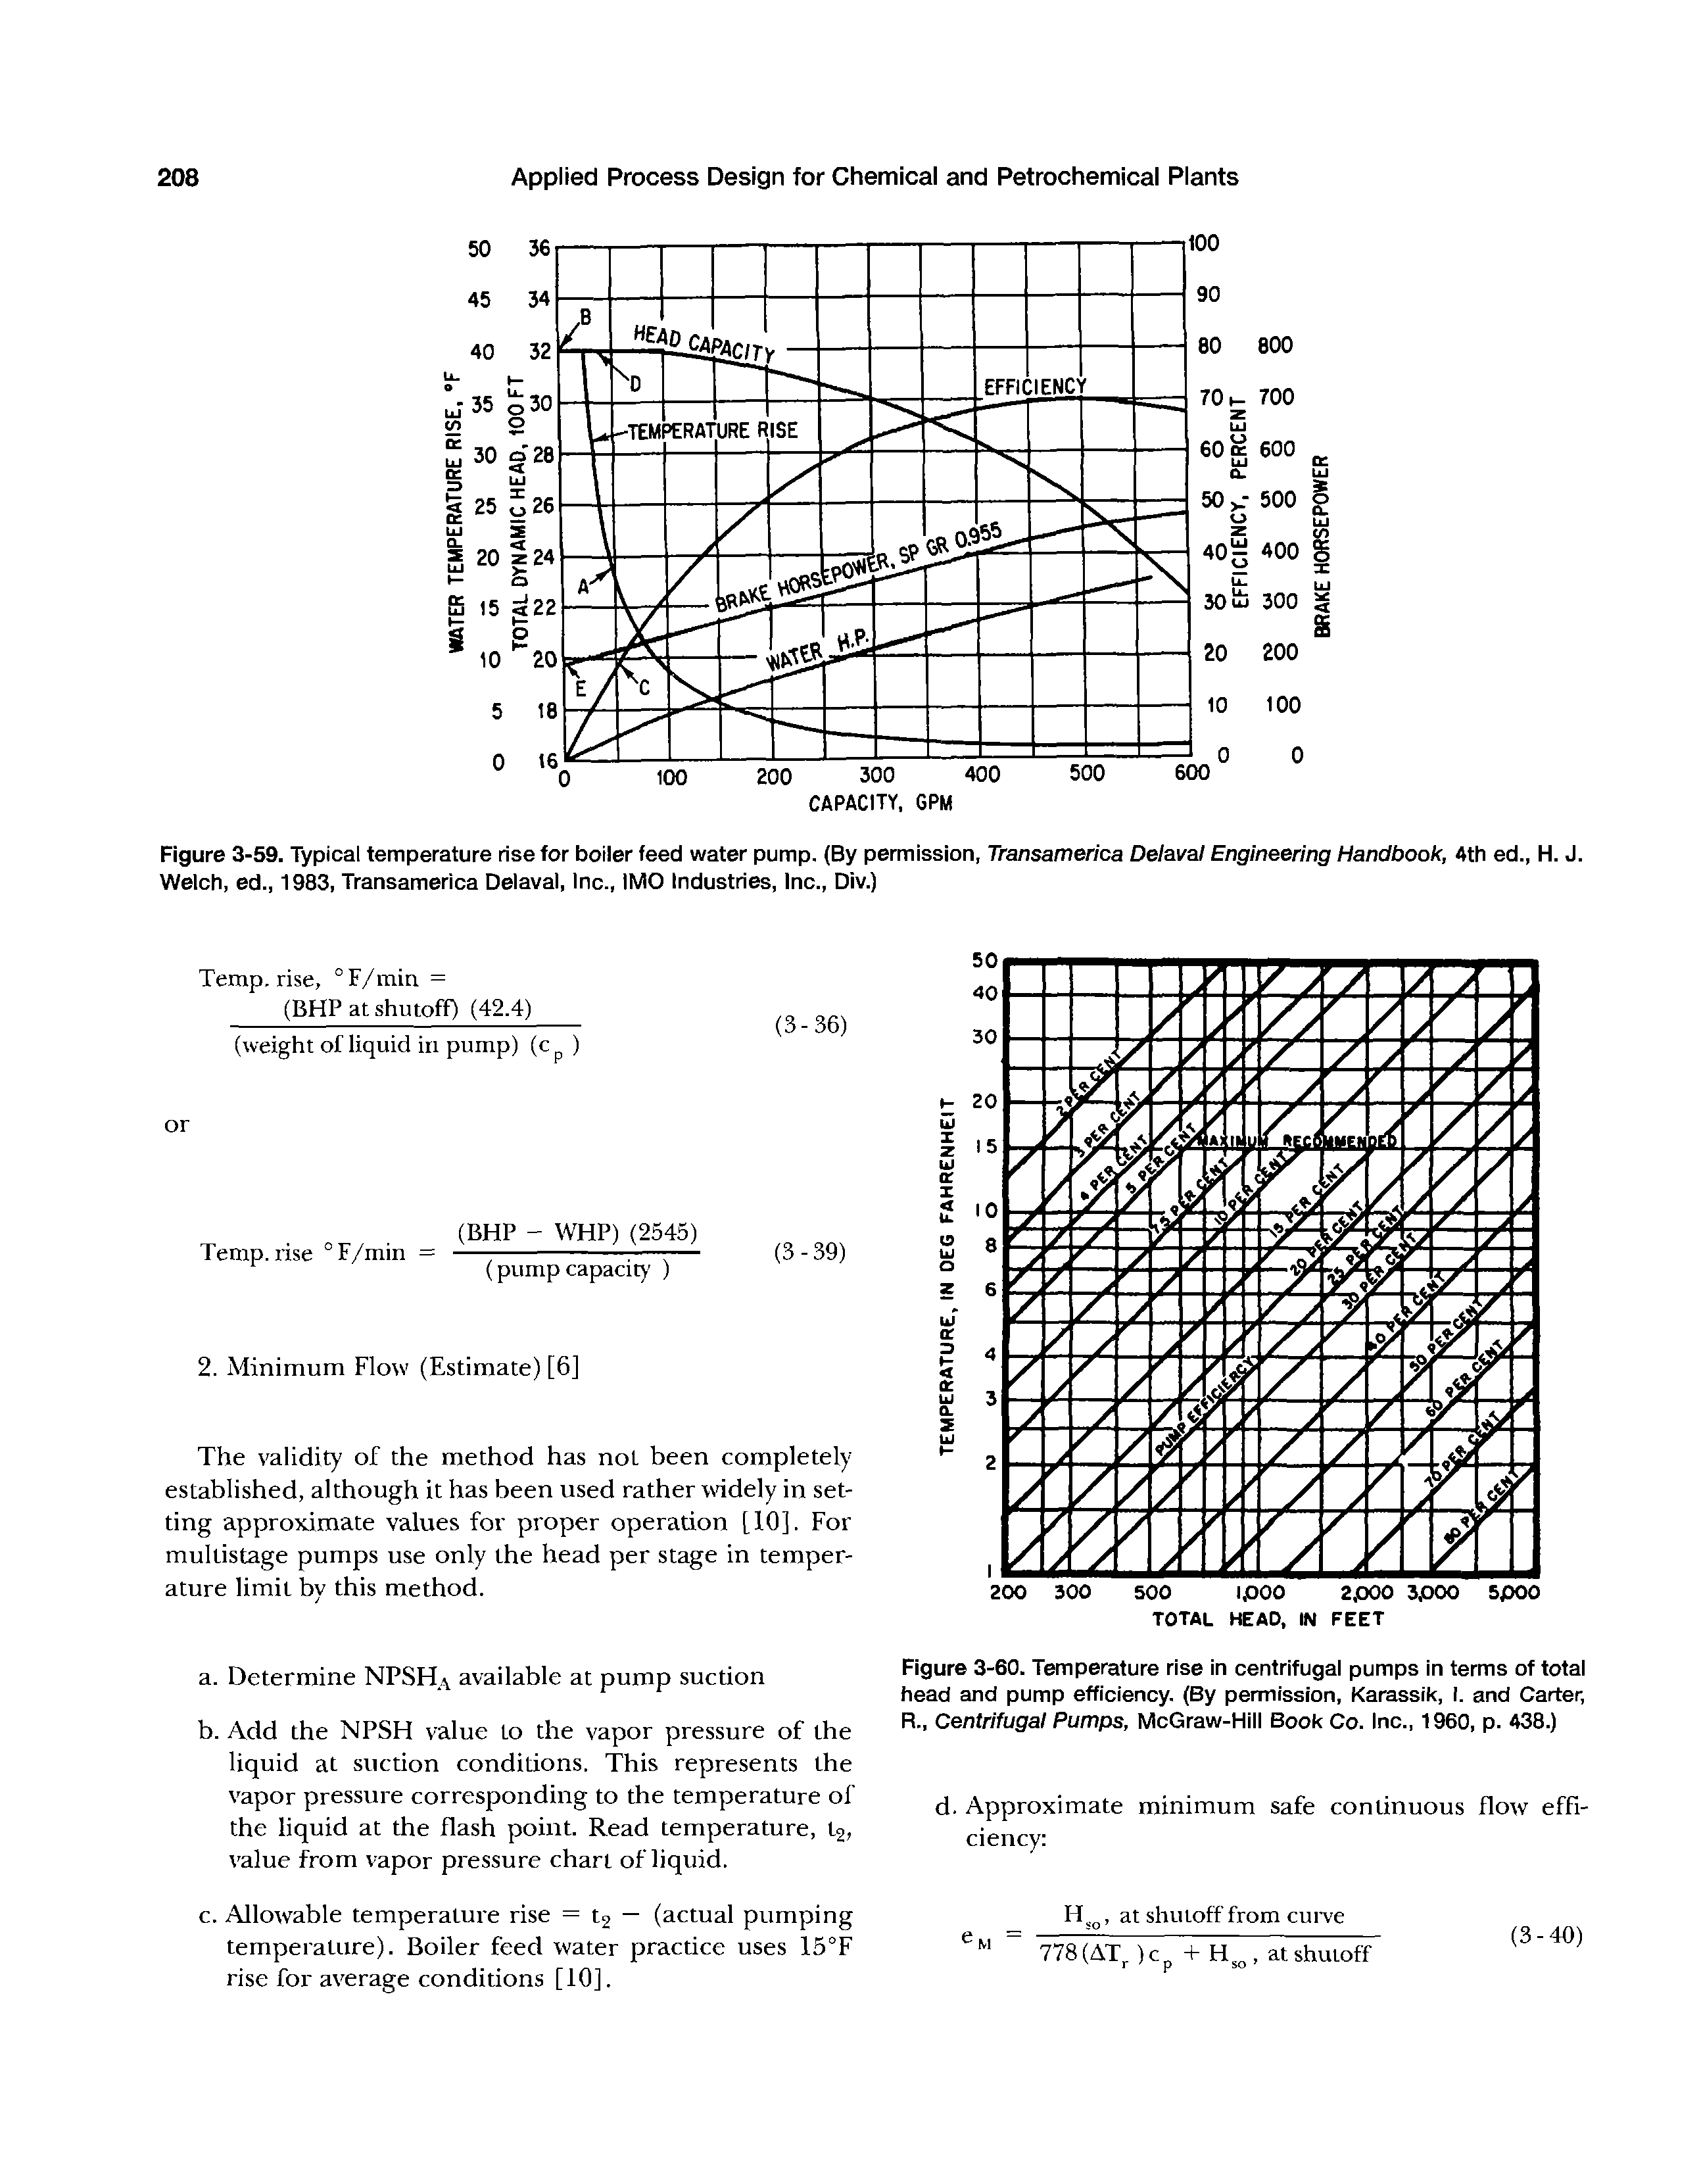 Figure 3-59. Typical temperature rise for boiler feed water pump. (By permission, Transamerica Delaval Engineering Handbook, 4th ed., H. J. Welch, ed., 1983, Transamerica Delaval, Inc., IMO Industries, Inc., Div.)...